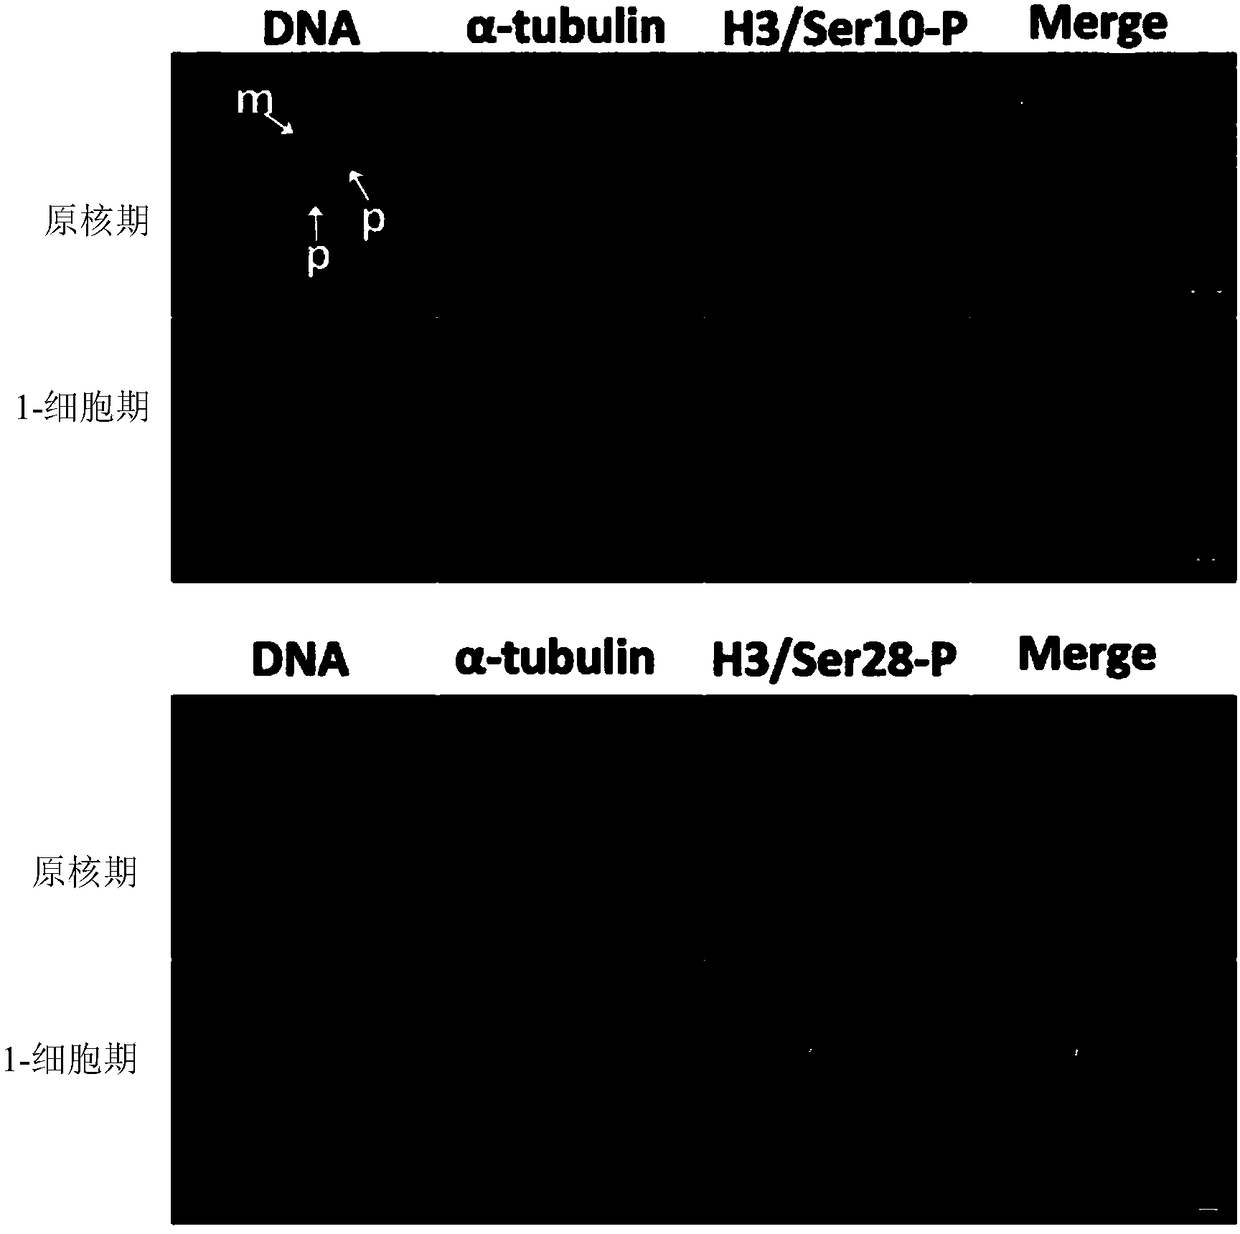 Application of human histone H3 Ser10 and Ser28 in identification of developmental staging of human early embryos